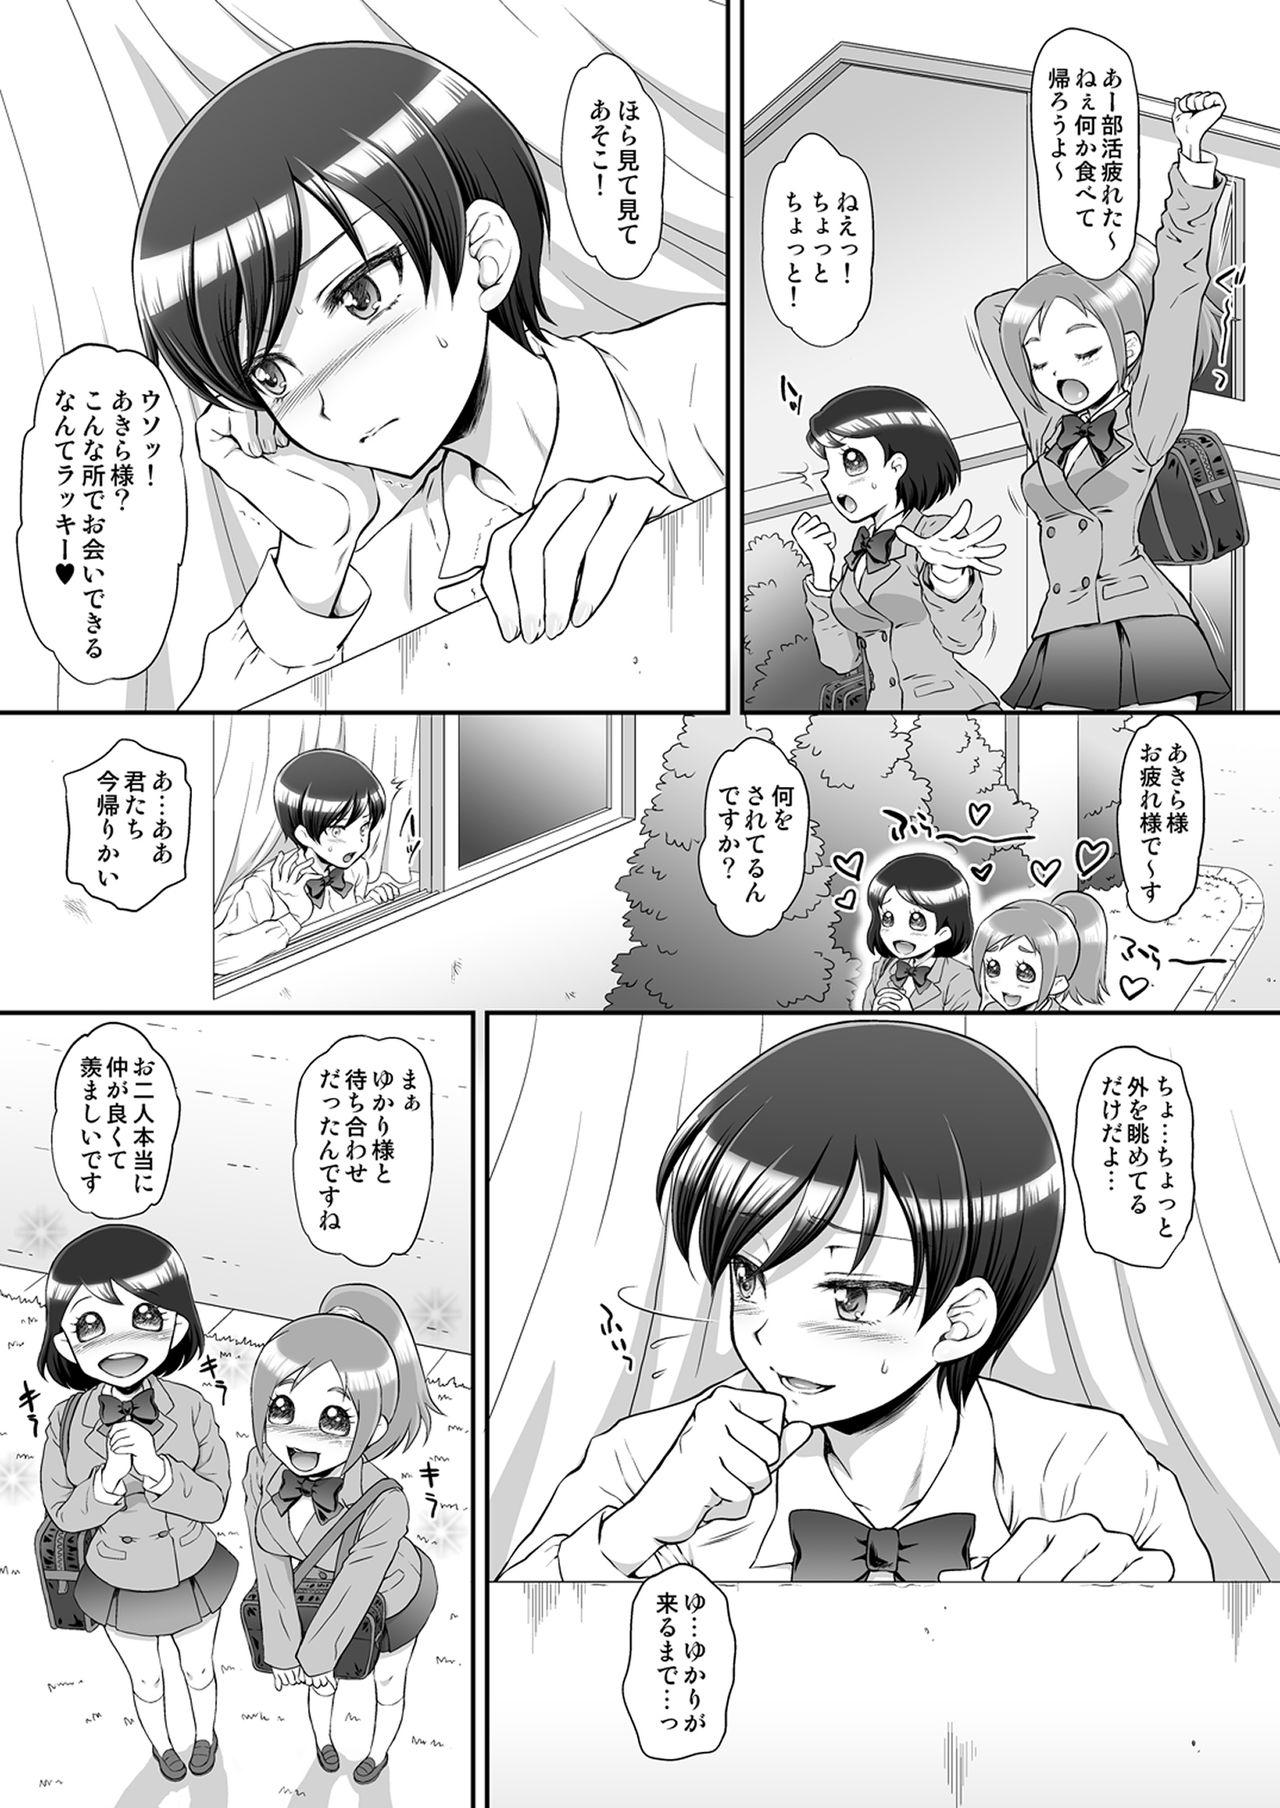 Messy Omakebon Collection 2 - Pretty cure Eurobabe - Page 3